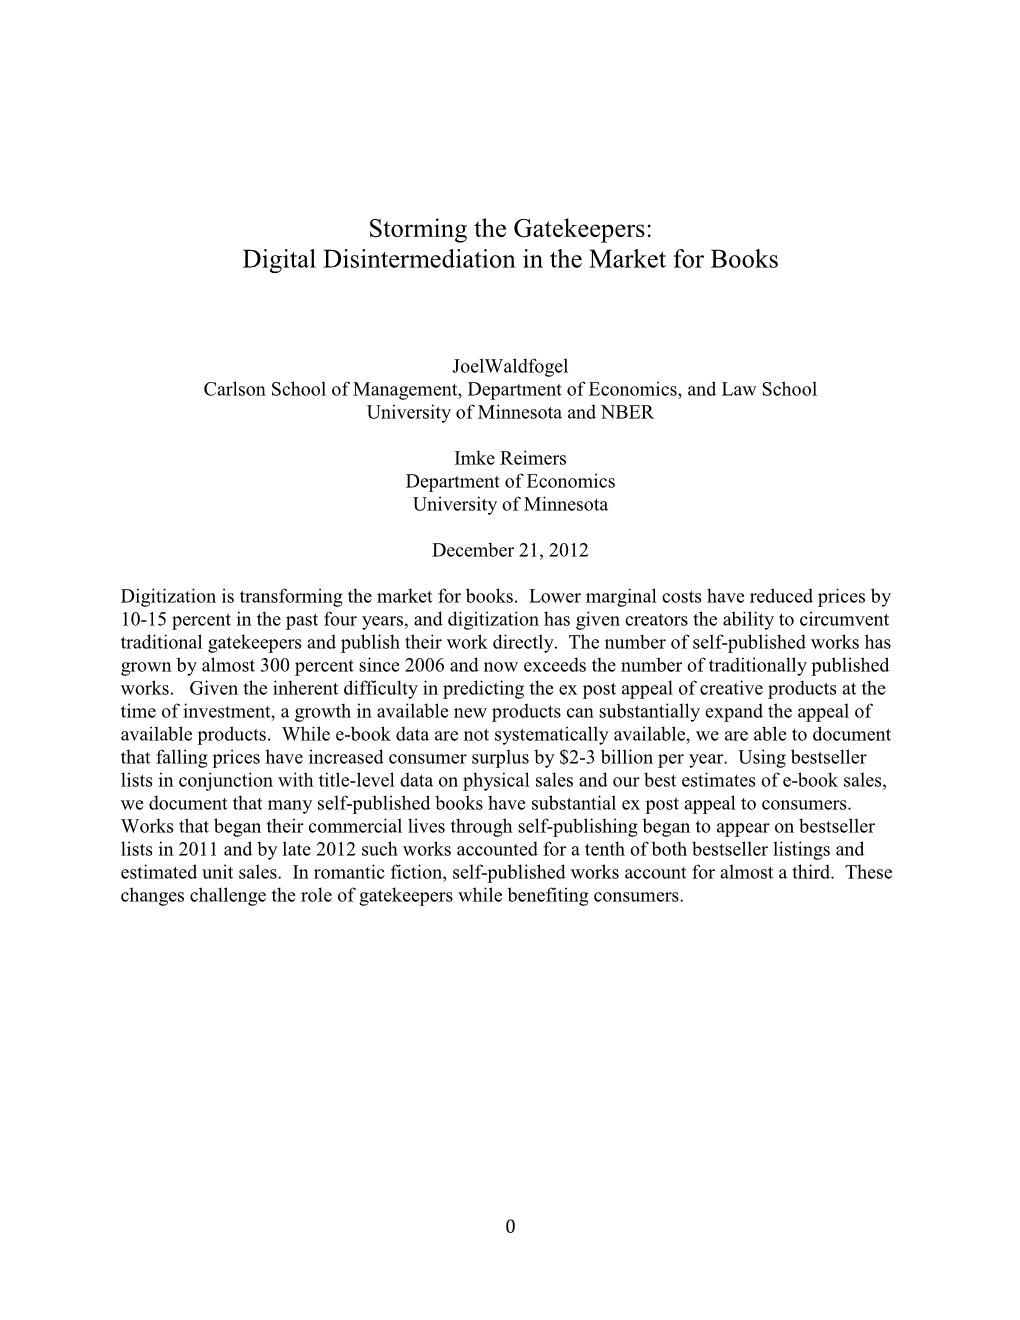 Storming the Gatekeepers: Digital Disintermediation in the Market for Books